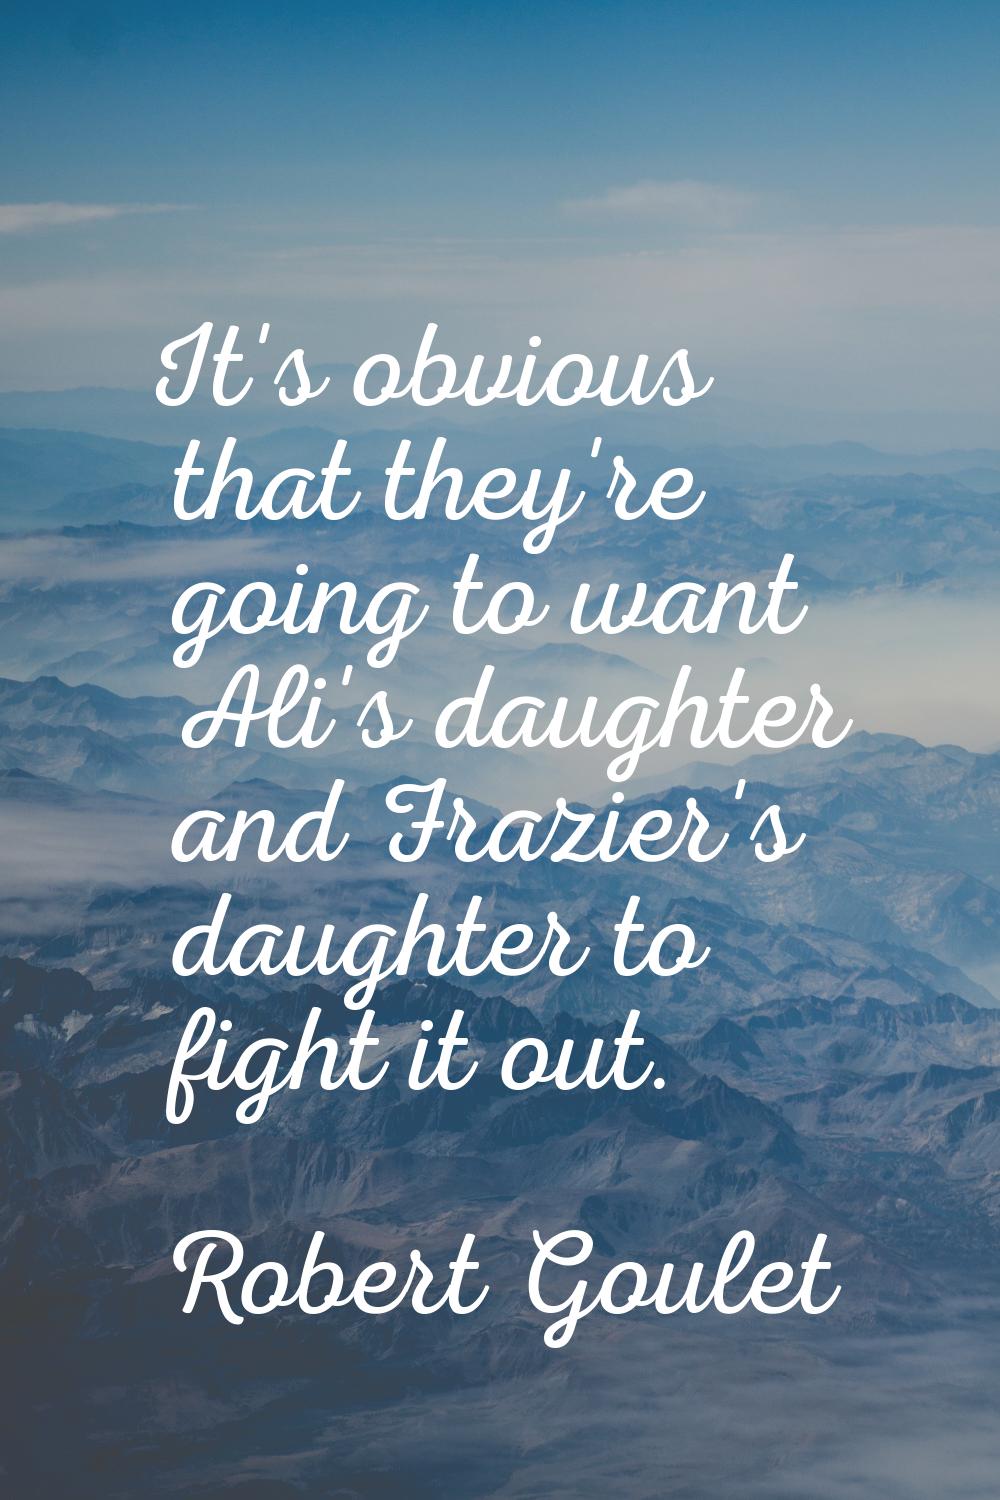 It's obvious that they're going to want Ali's daughter and Frazier's daughter to fight it out.